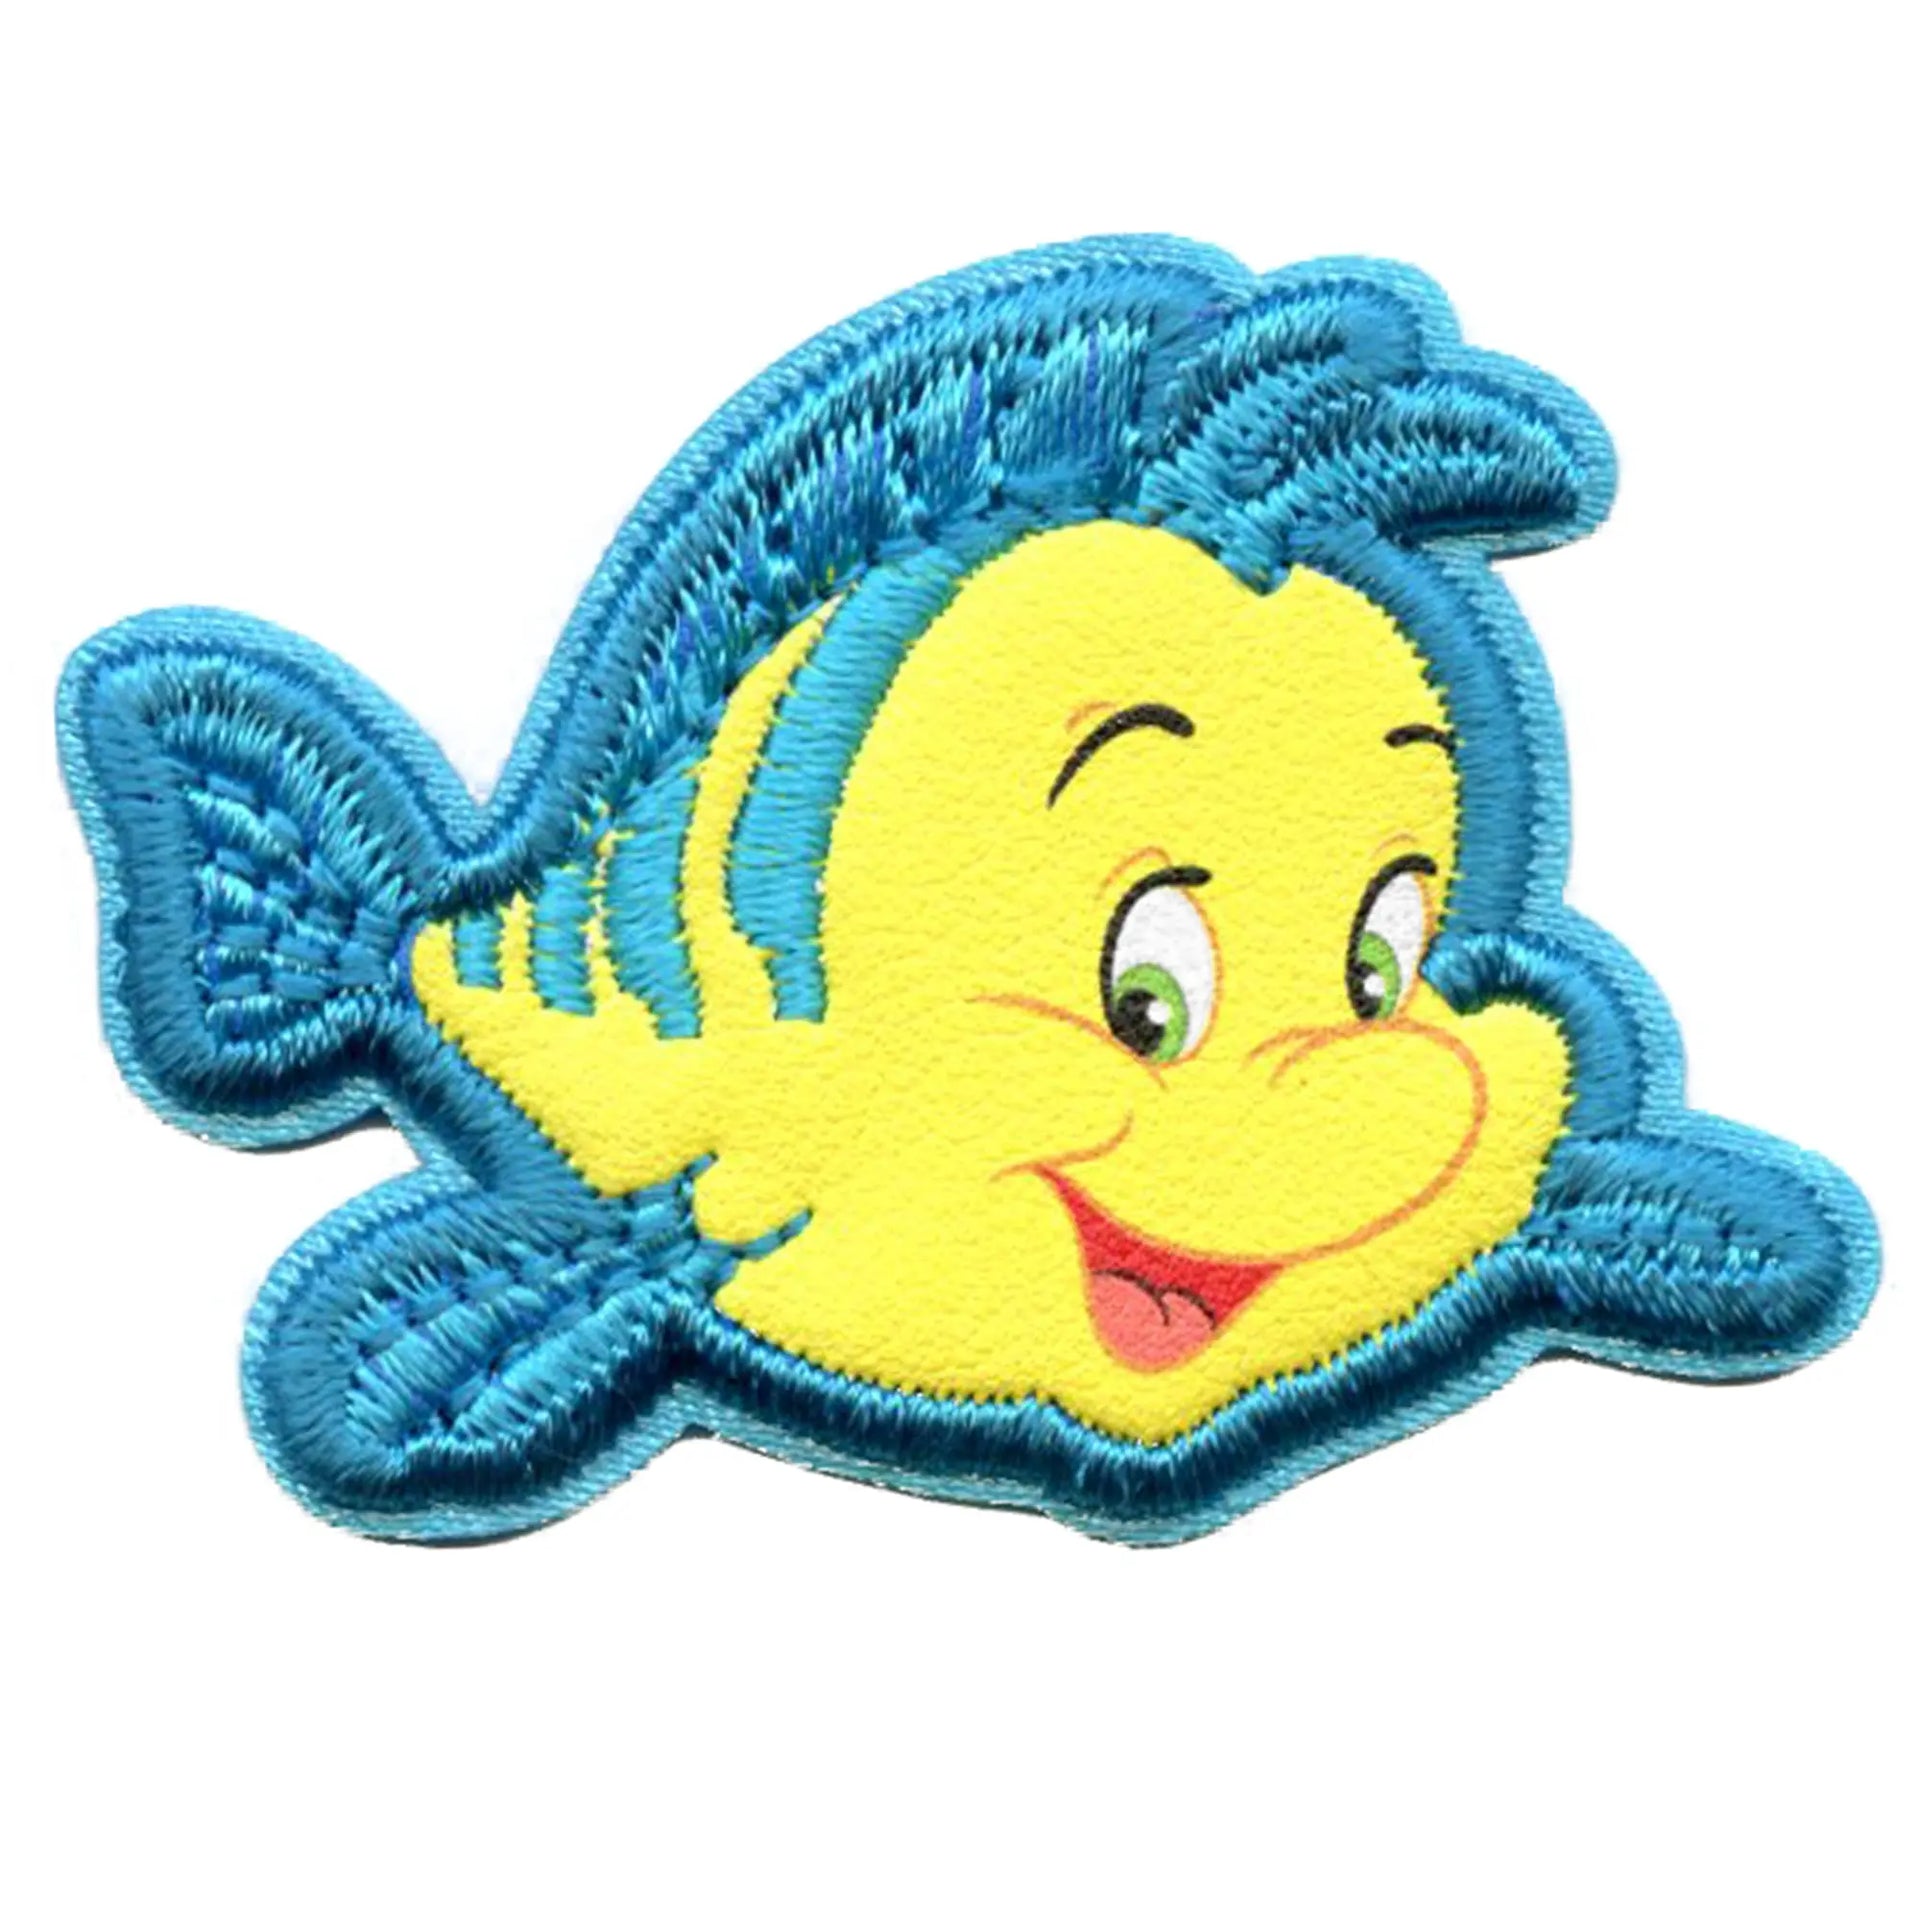 The Little Mermaid Flounder Patch Disney Friend Fish Embroidered